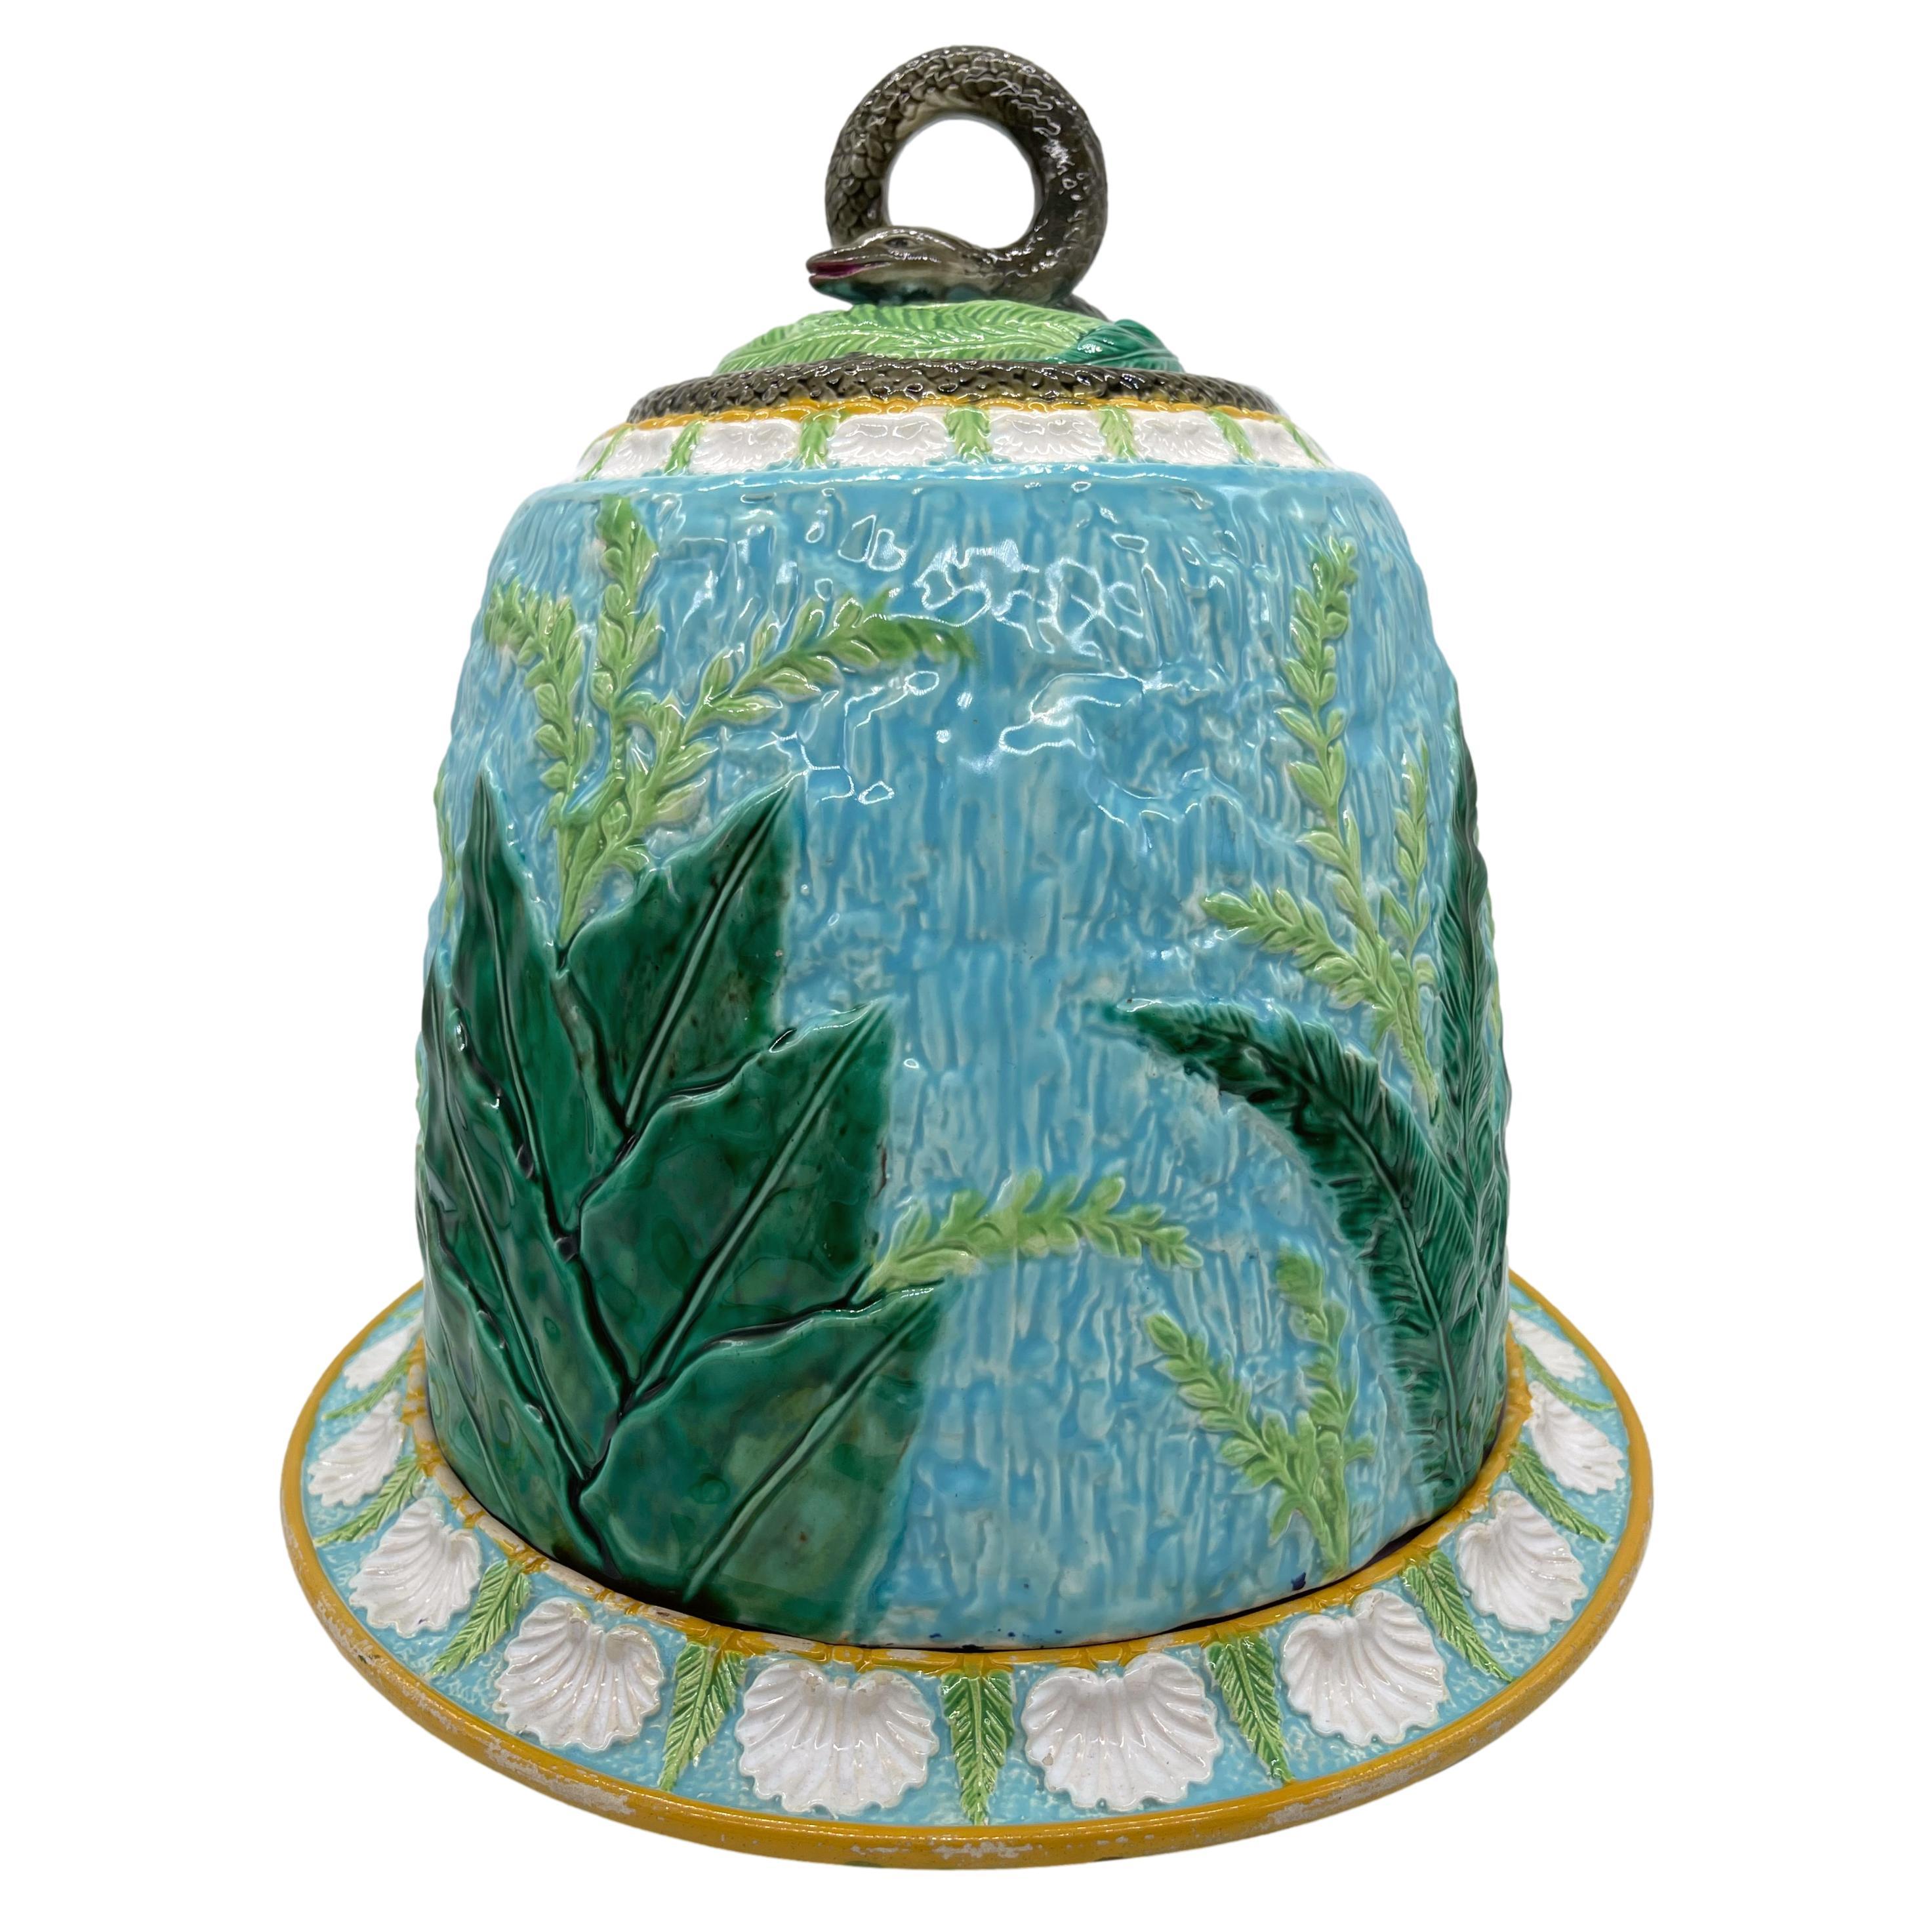 George Jones Majolica Cheese Bell and Stand, the dome with green-glazed leaves, ferns, and flowering grasses, on a bark-textured turquoise ground, the top banded with shells and acanthus leaves, a coiled, smiling snake among palms and ferns forming